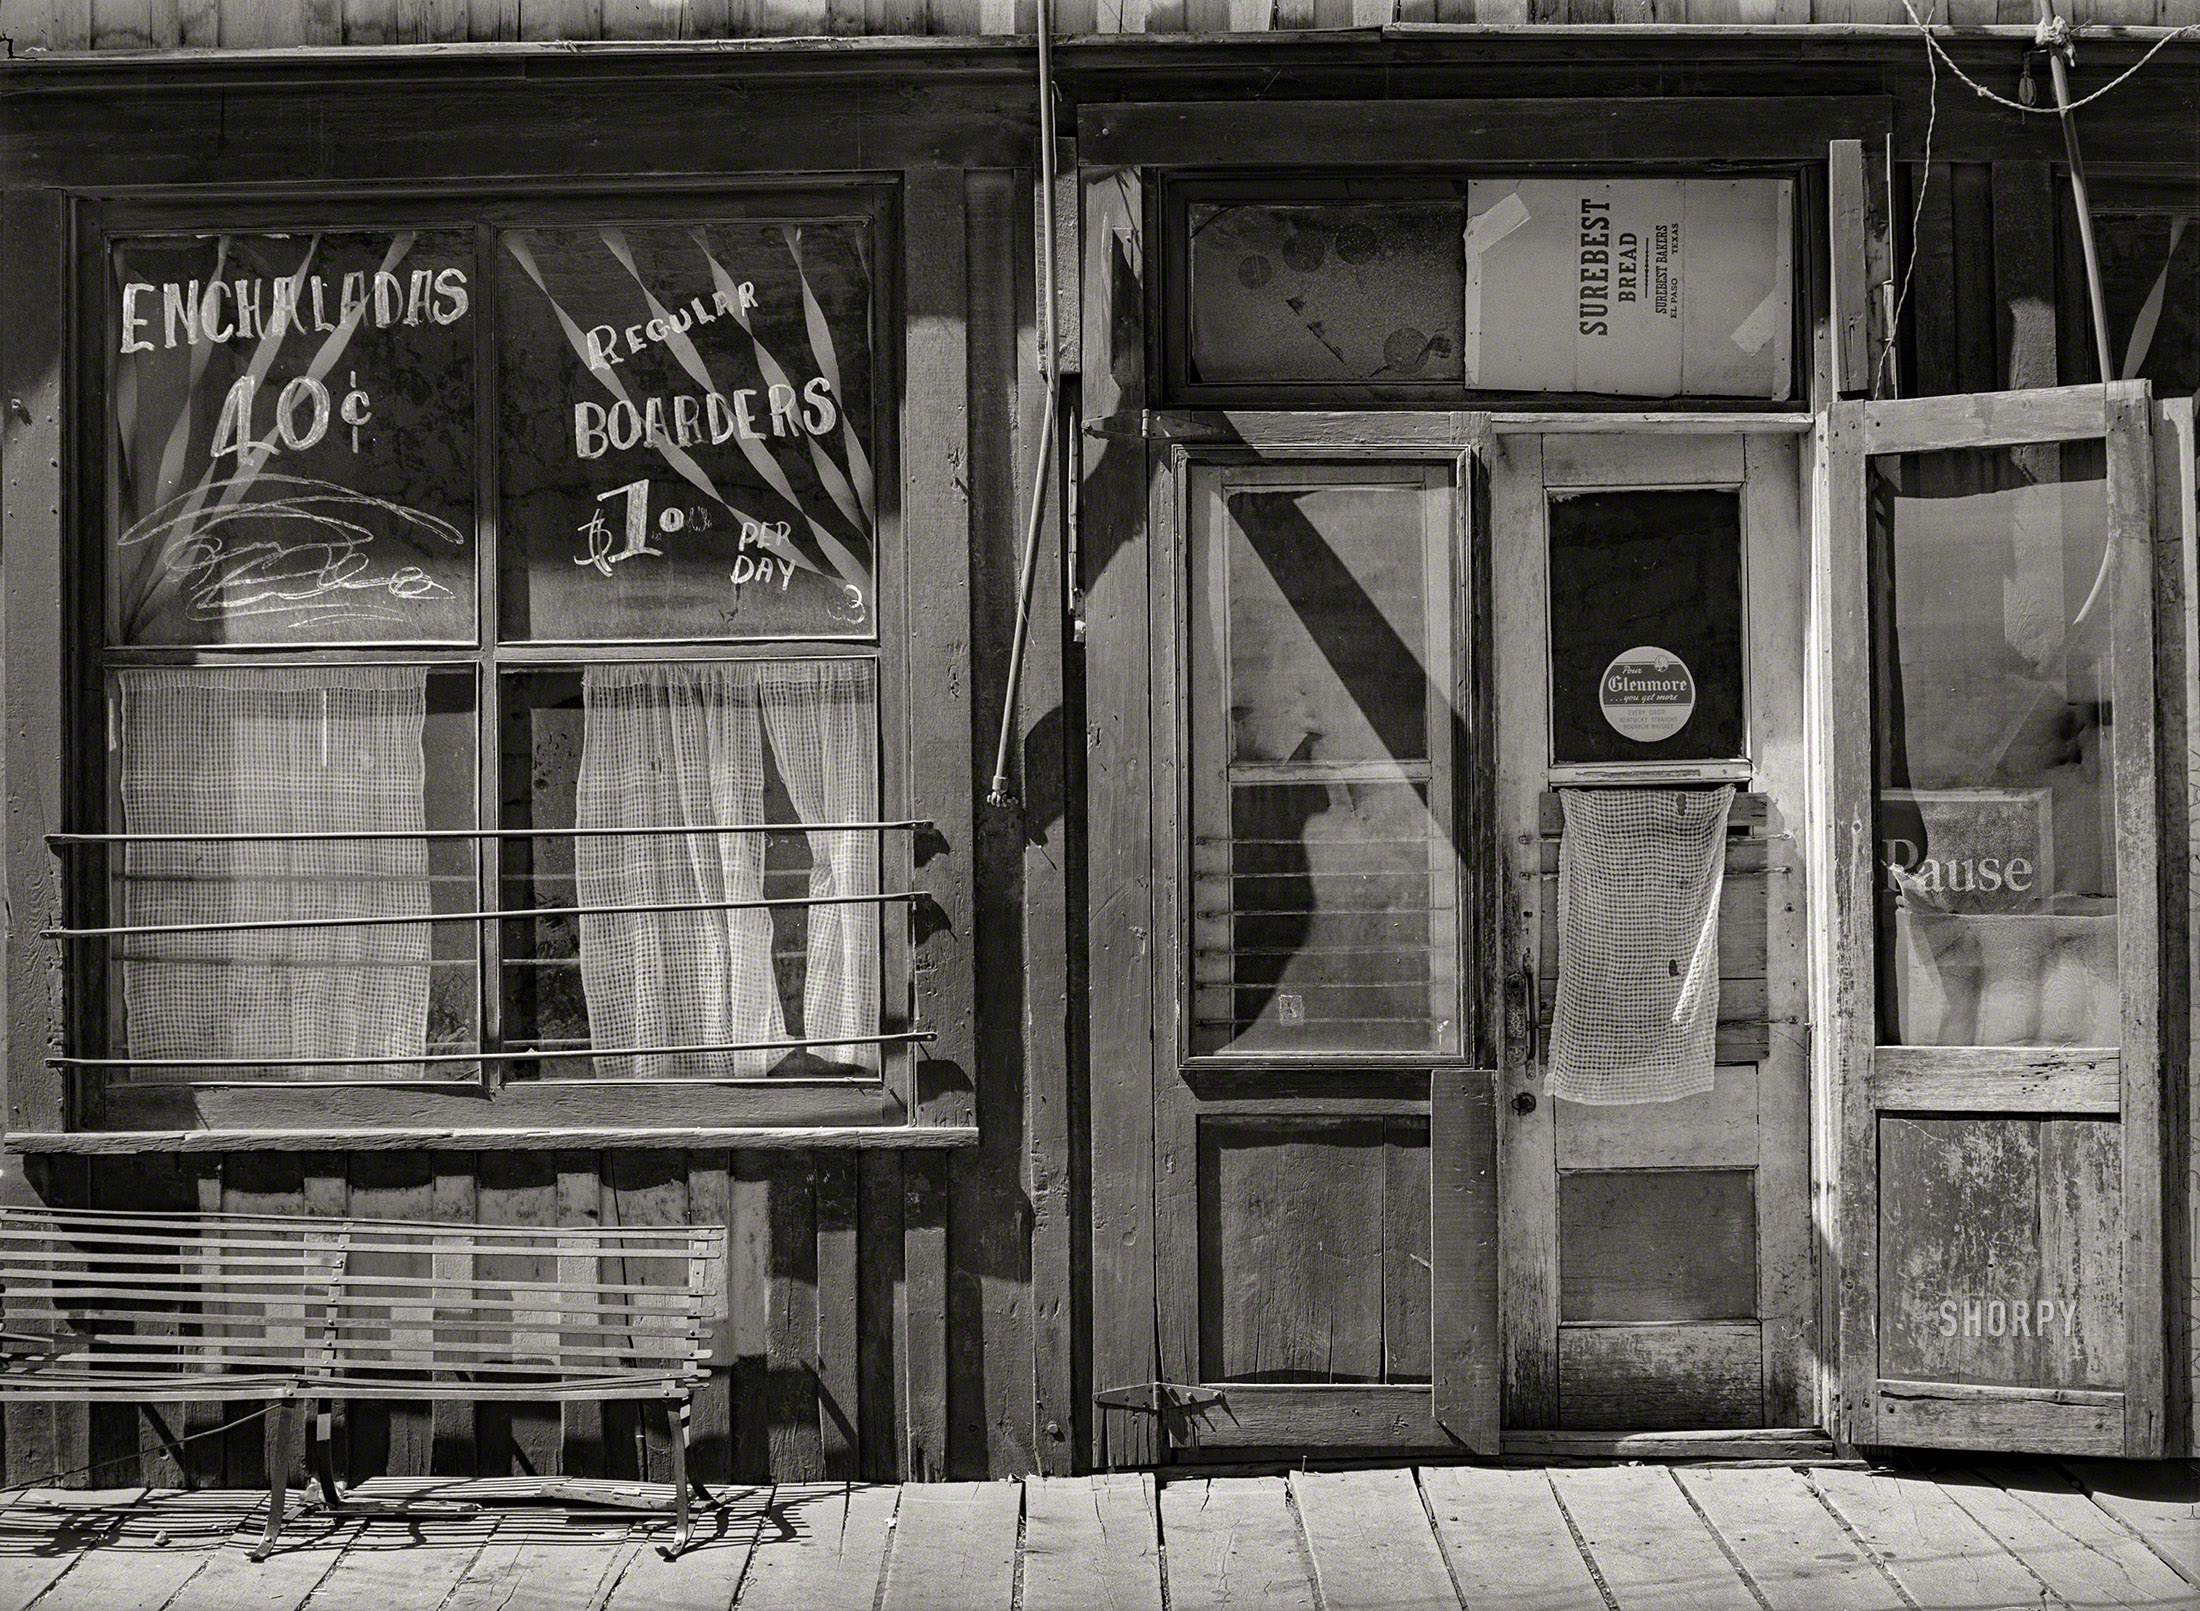 June 1940. "Detail of front of store building. Mogollon, New Mexico." Photo by Russell Lee for the Farm Security Administration. View full size.